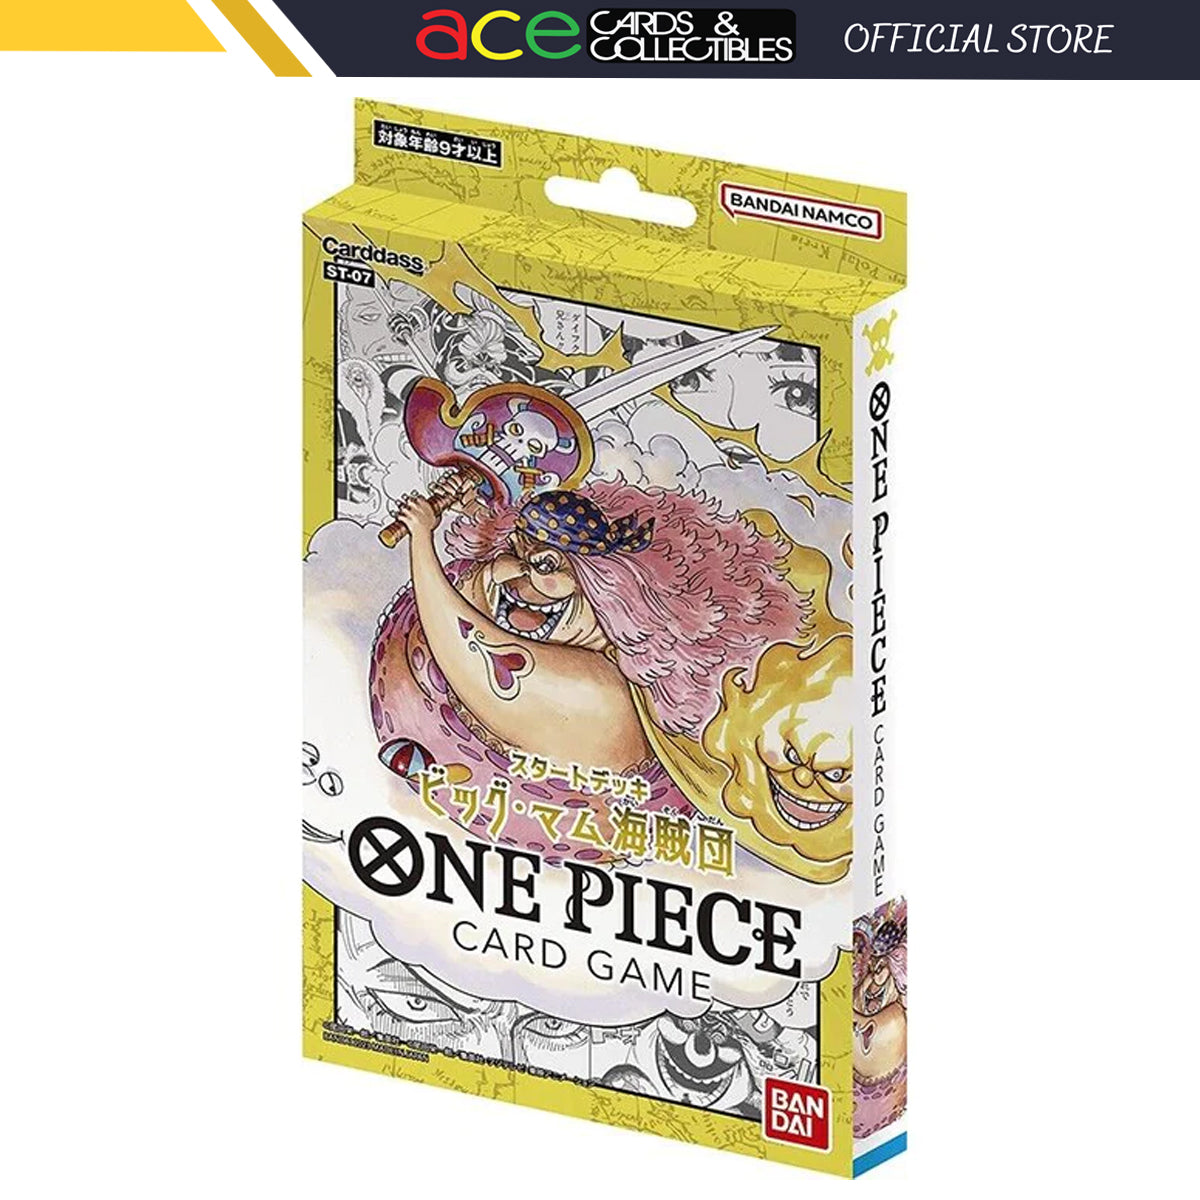 One Piece Card Game Big Mom Pirates Starter Deck (ST-07) (Japanese)-Bandai-Ace Cards &amp; Collectibles